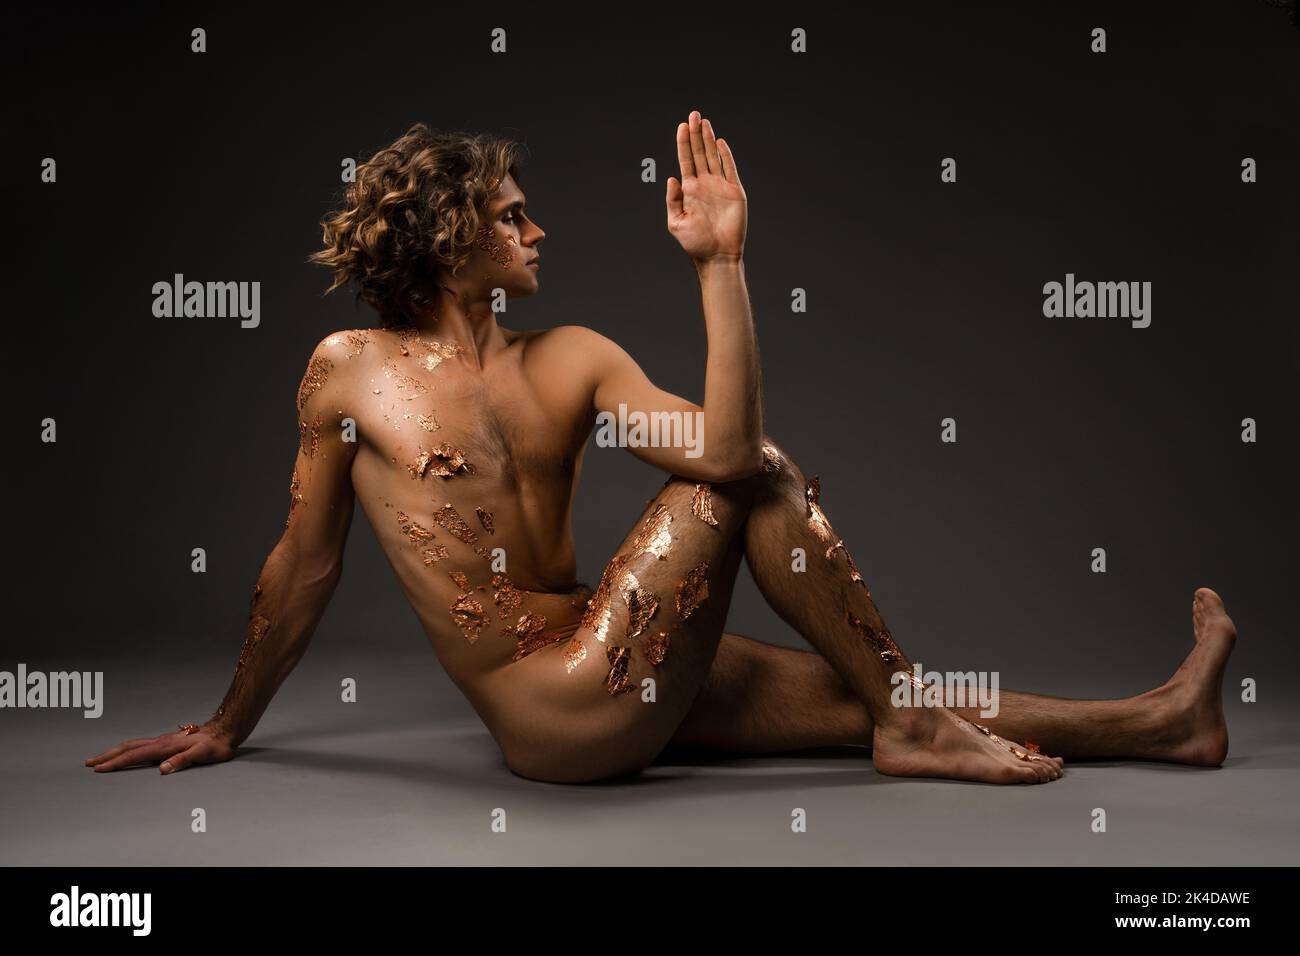 Naked young man doing Seated Spinal Twist pose Stock Photo